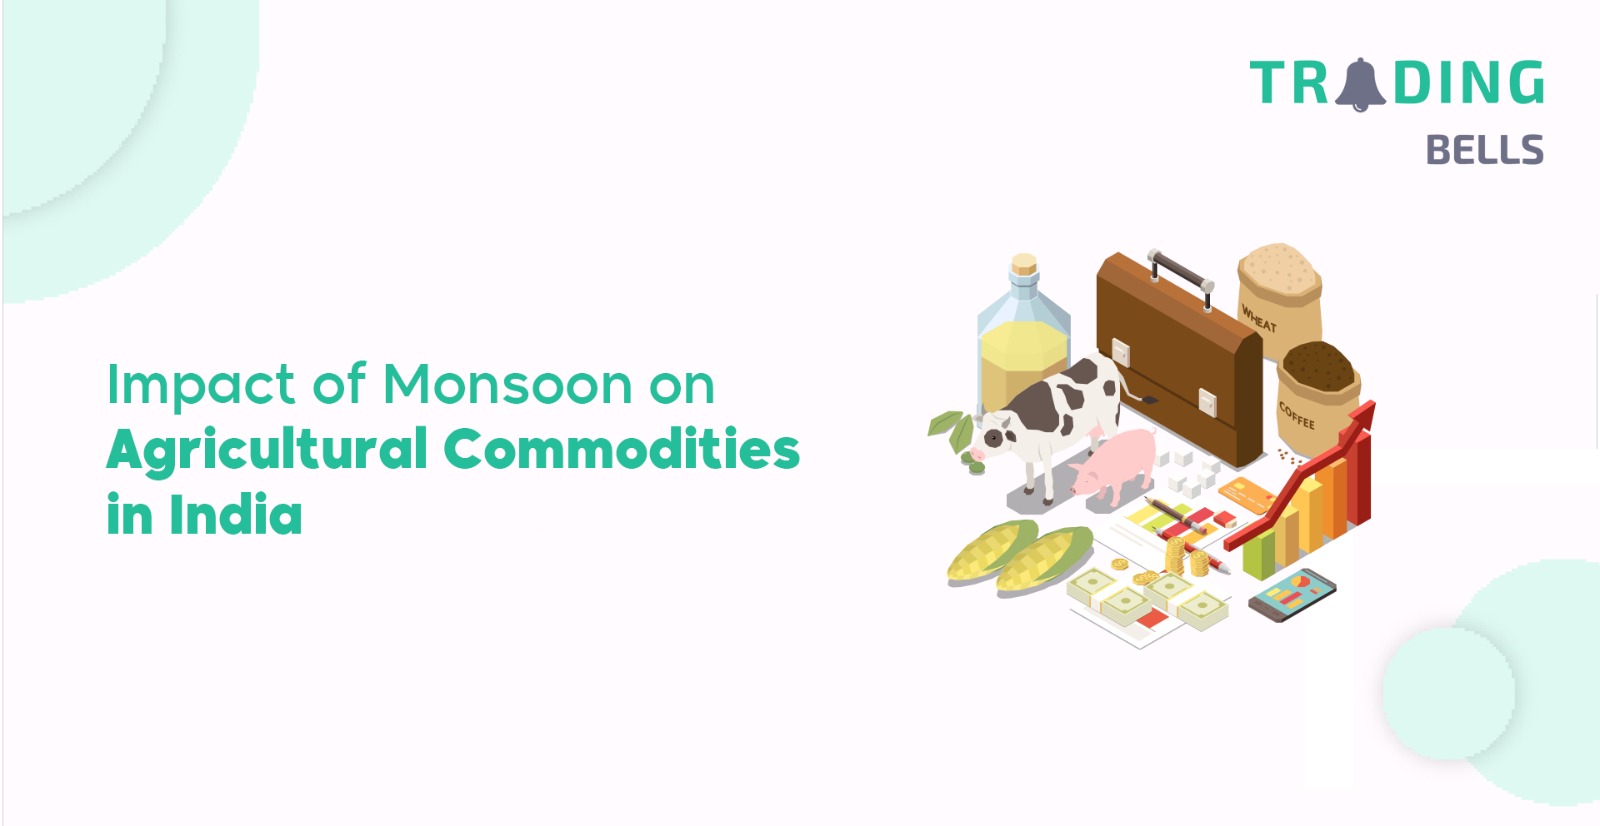 Impact of Monsoon on Agricultural Commodities in India